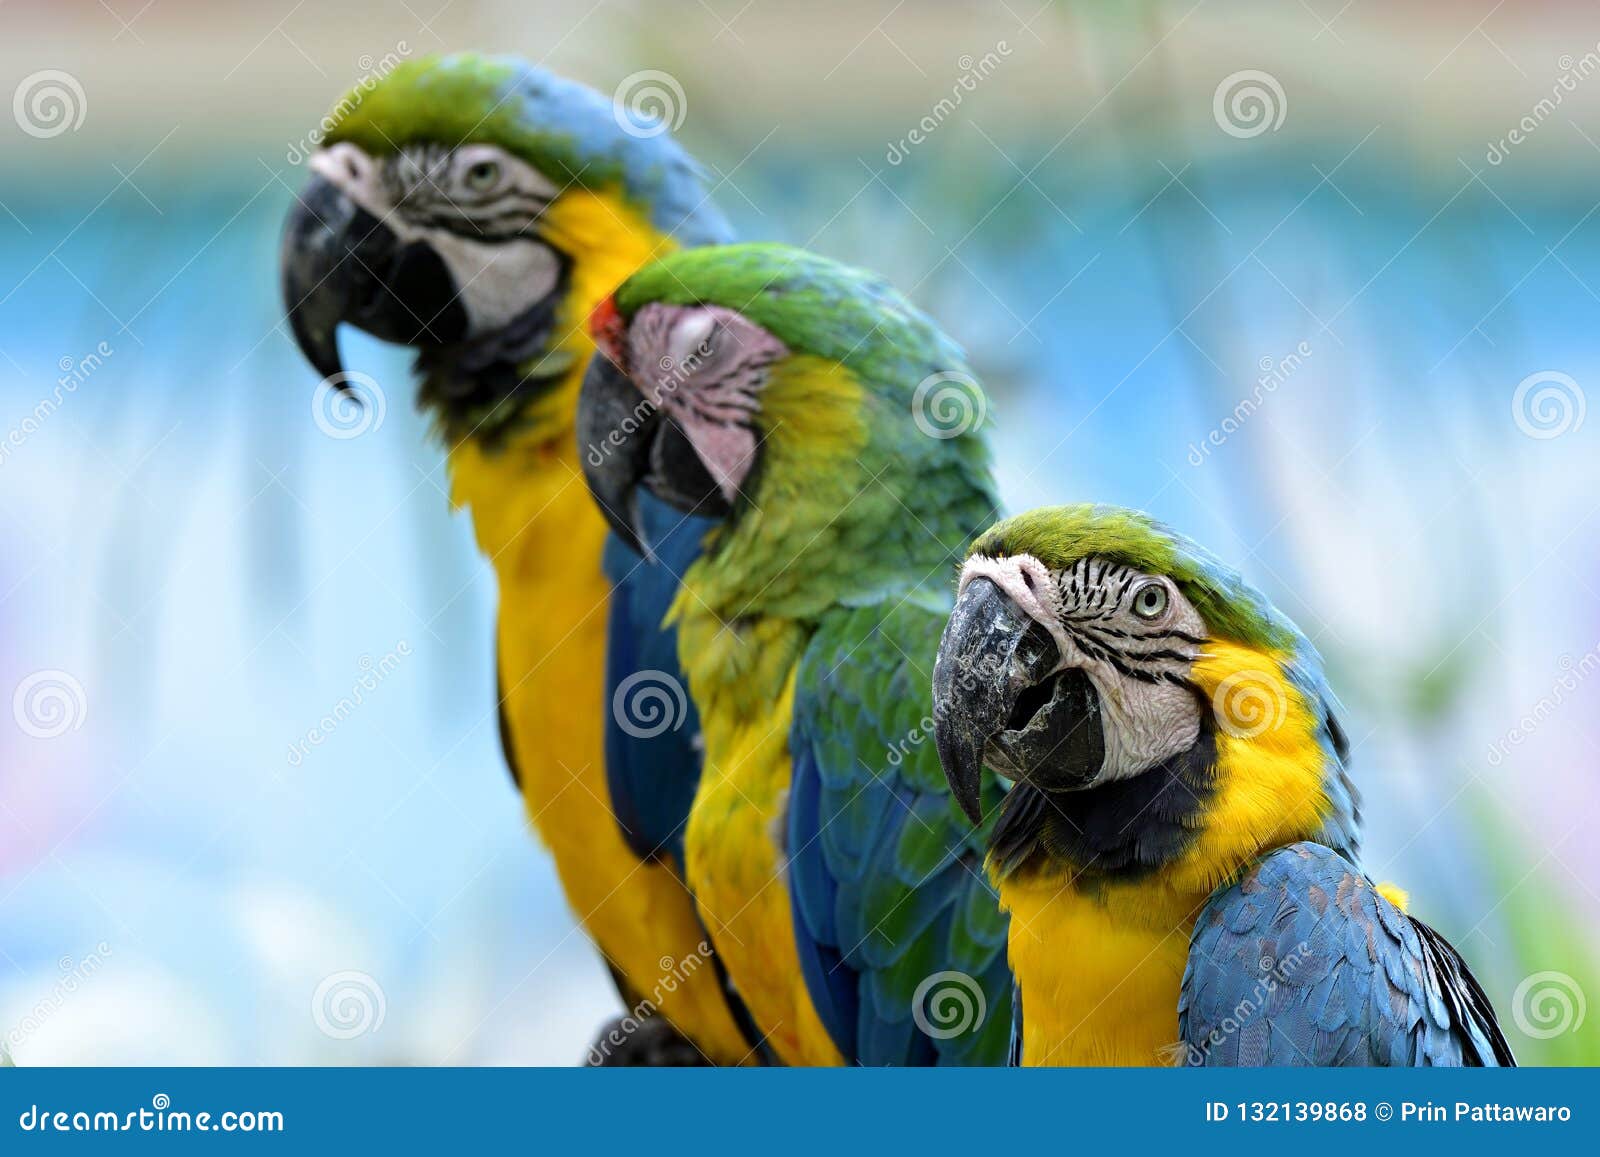 blue and gold macaws sitting together aside sleepy bufon's macaw